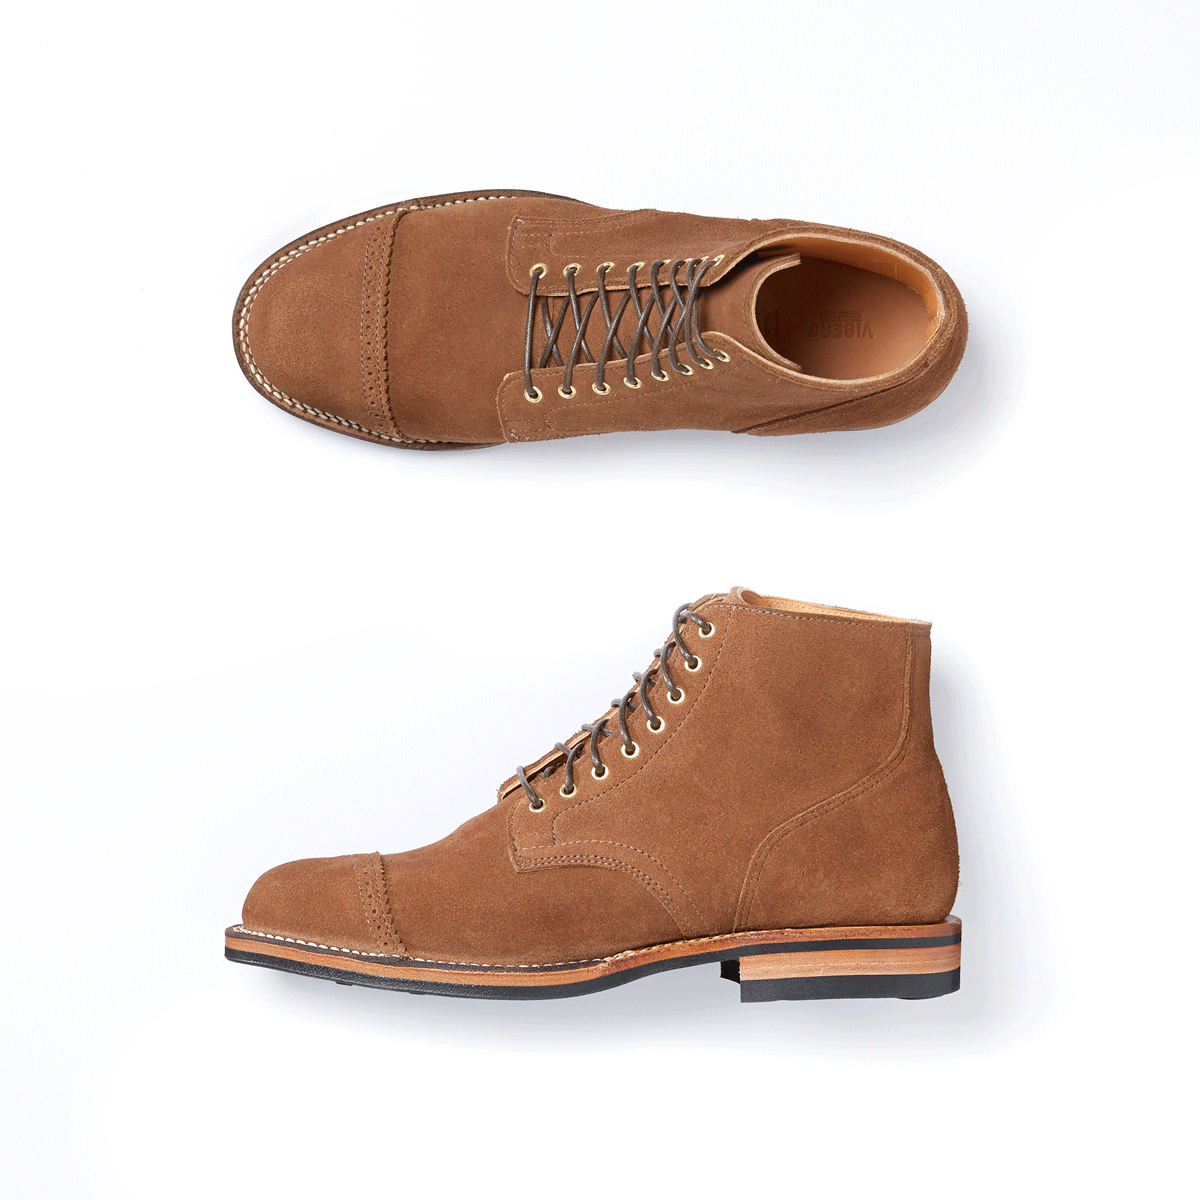 Viberg-x-Division-Road-SnuffCalfSuede-ServiceBoot_1200